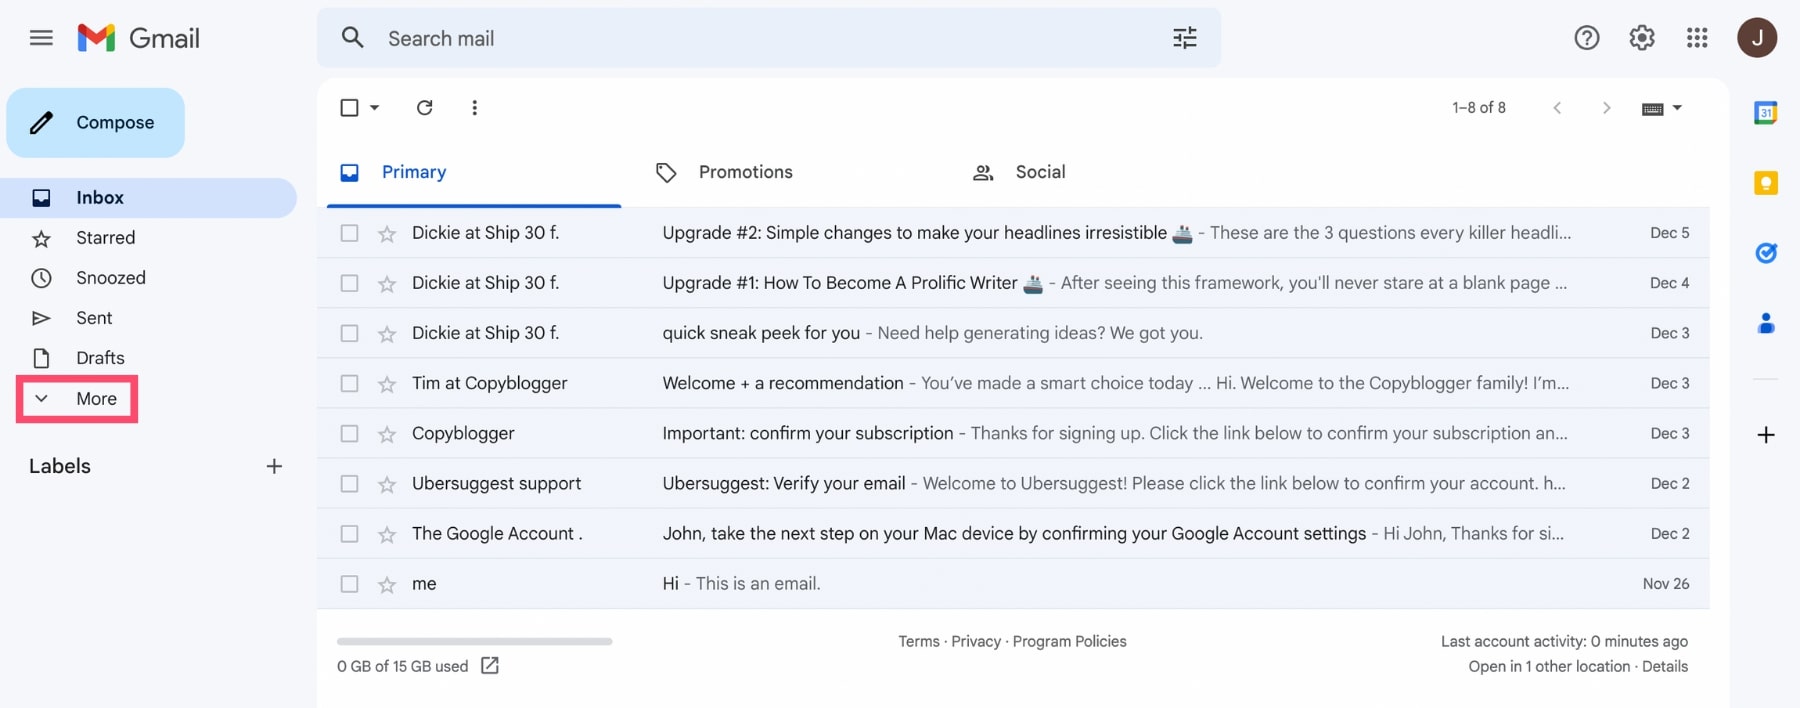 How to display all the Gmail folders